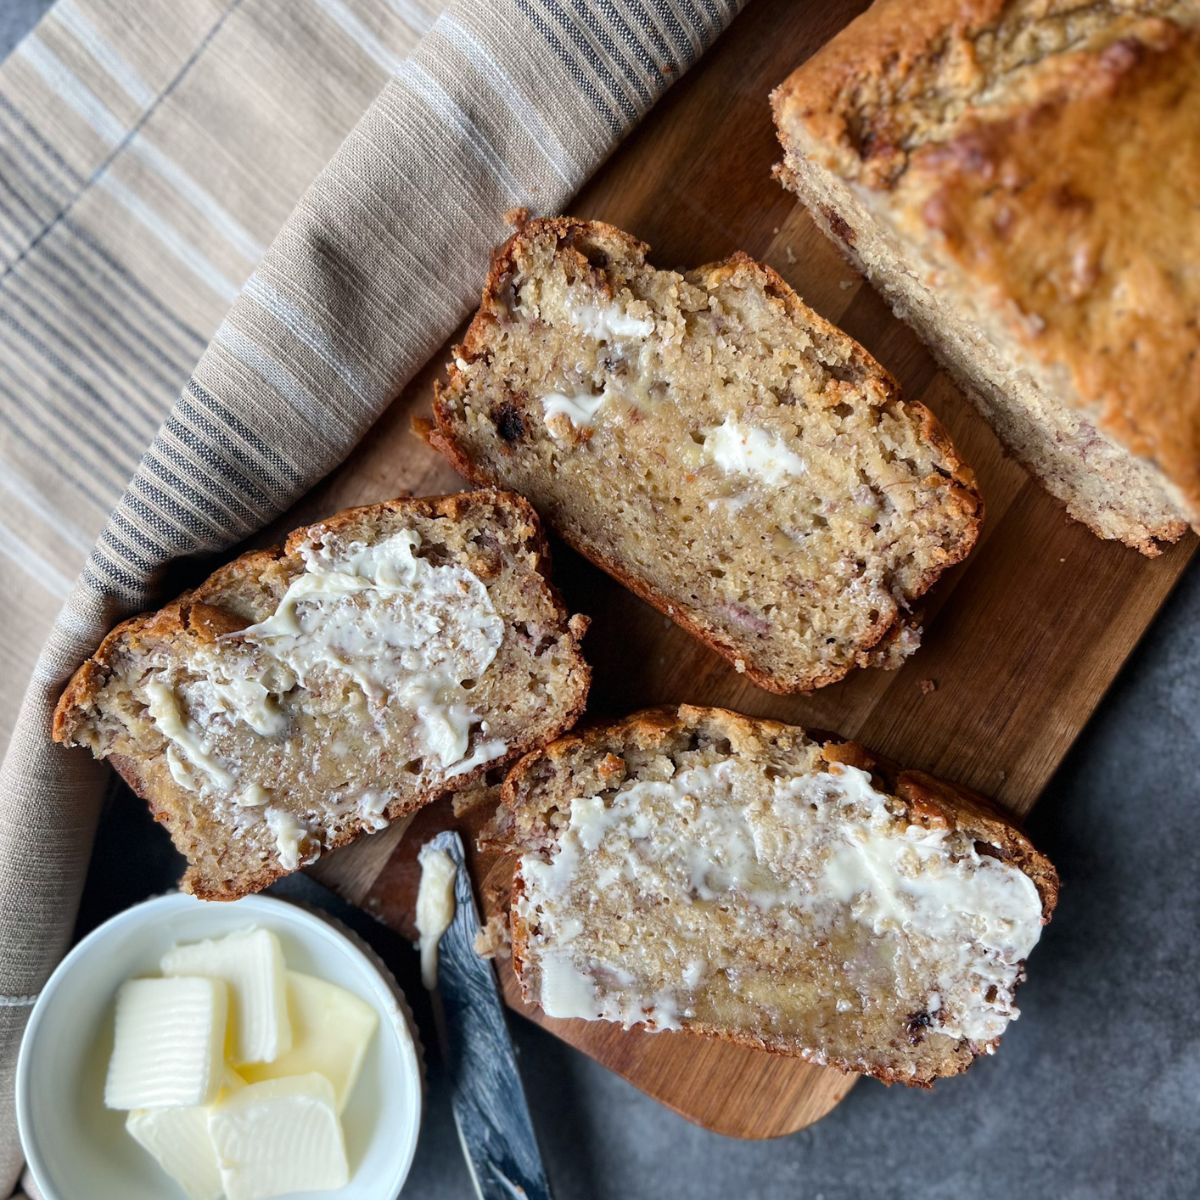 Three slices of tahini banana bread with butter spread on them. They are sitting on top of a wooden cutting board with a dish of butter pads and the loaf next to them.